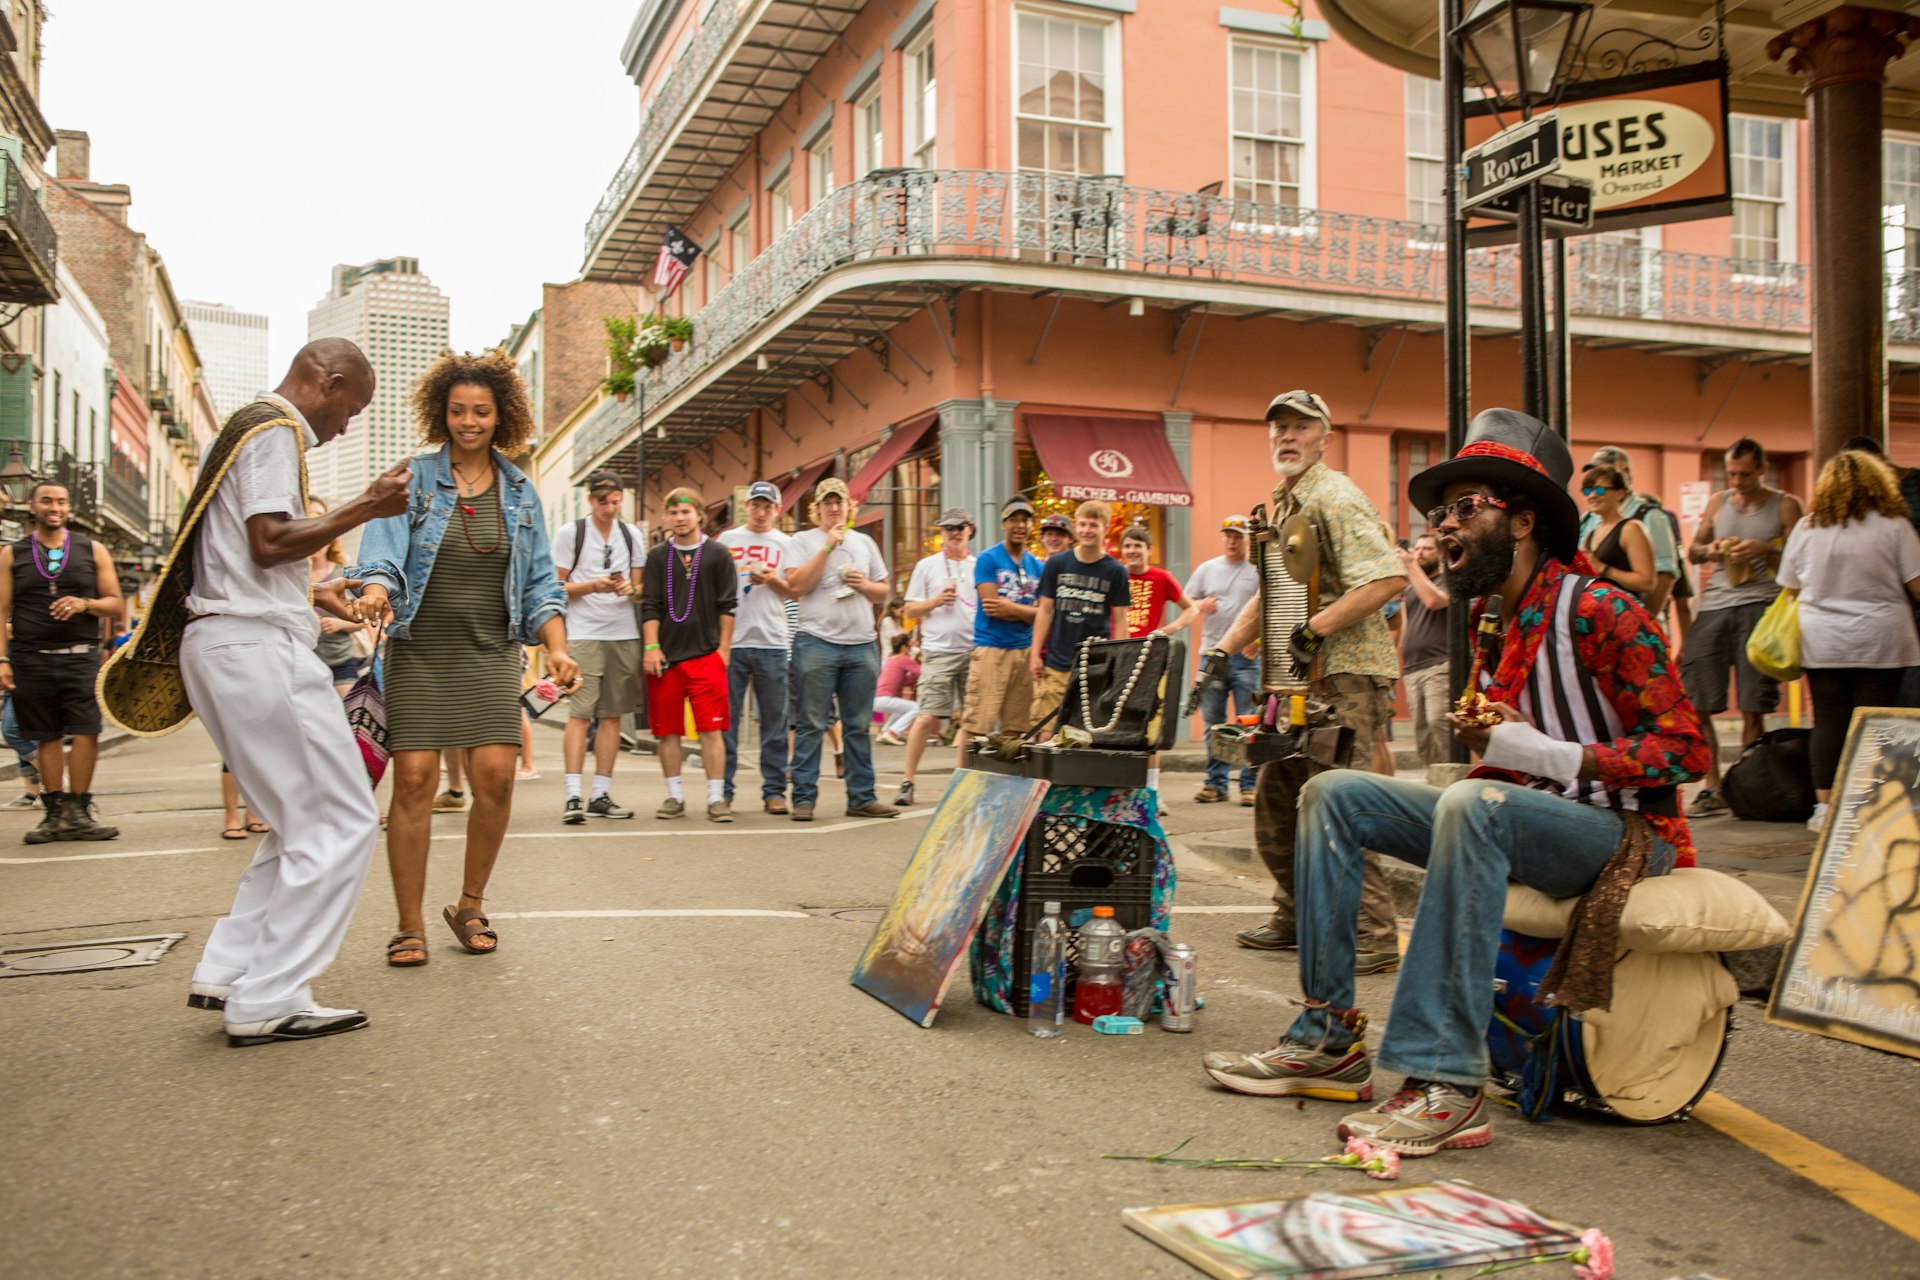 People dancing to music on a street corner in the French Quarter in New Orleans, Louisiana